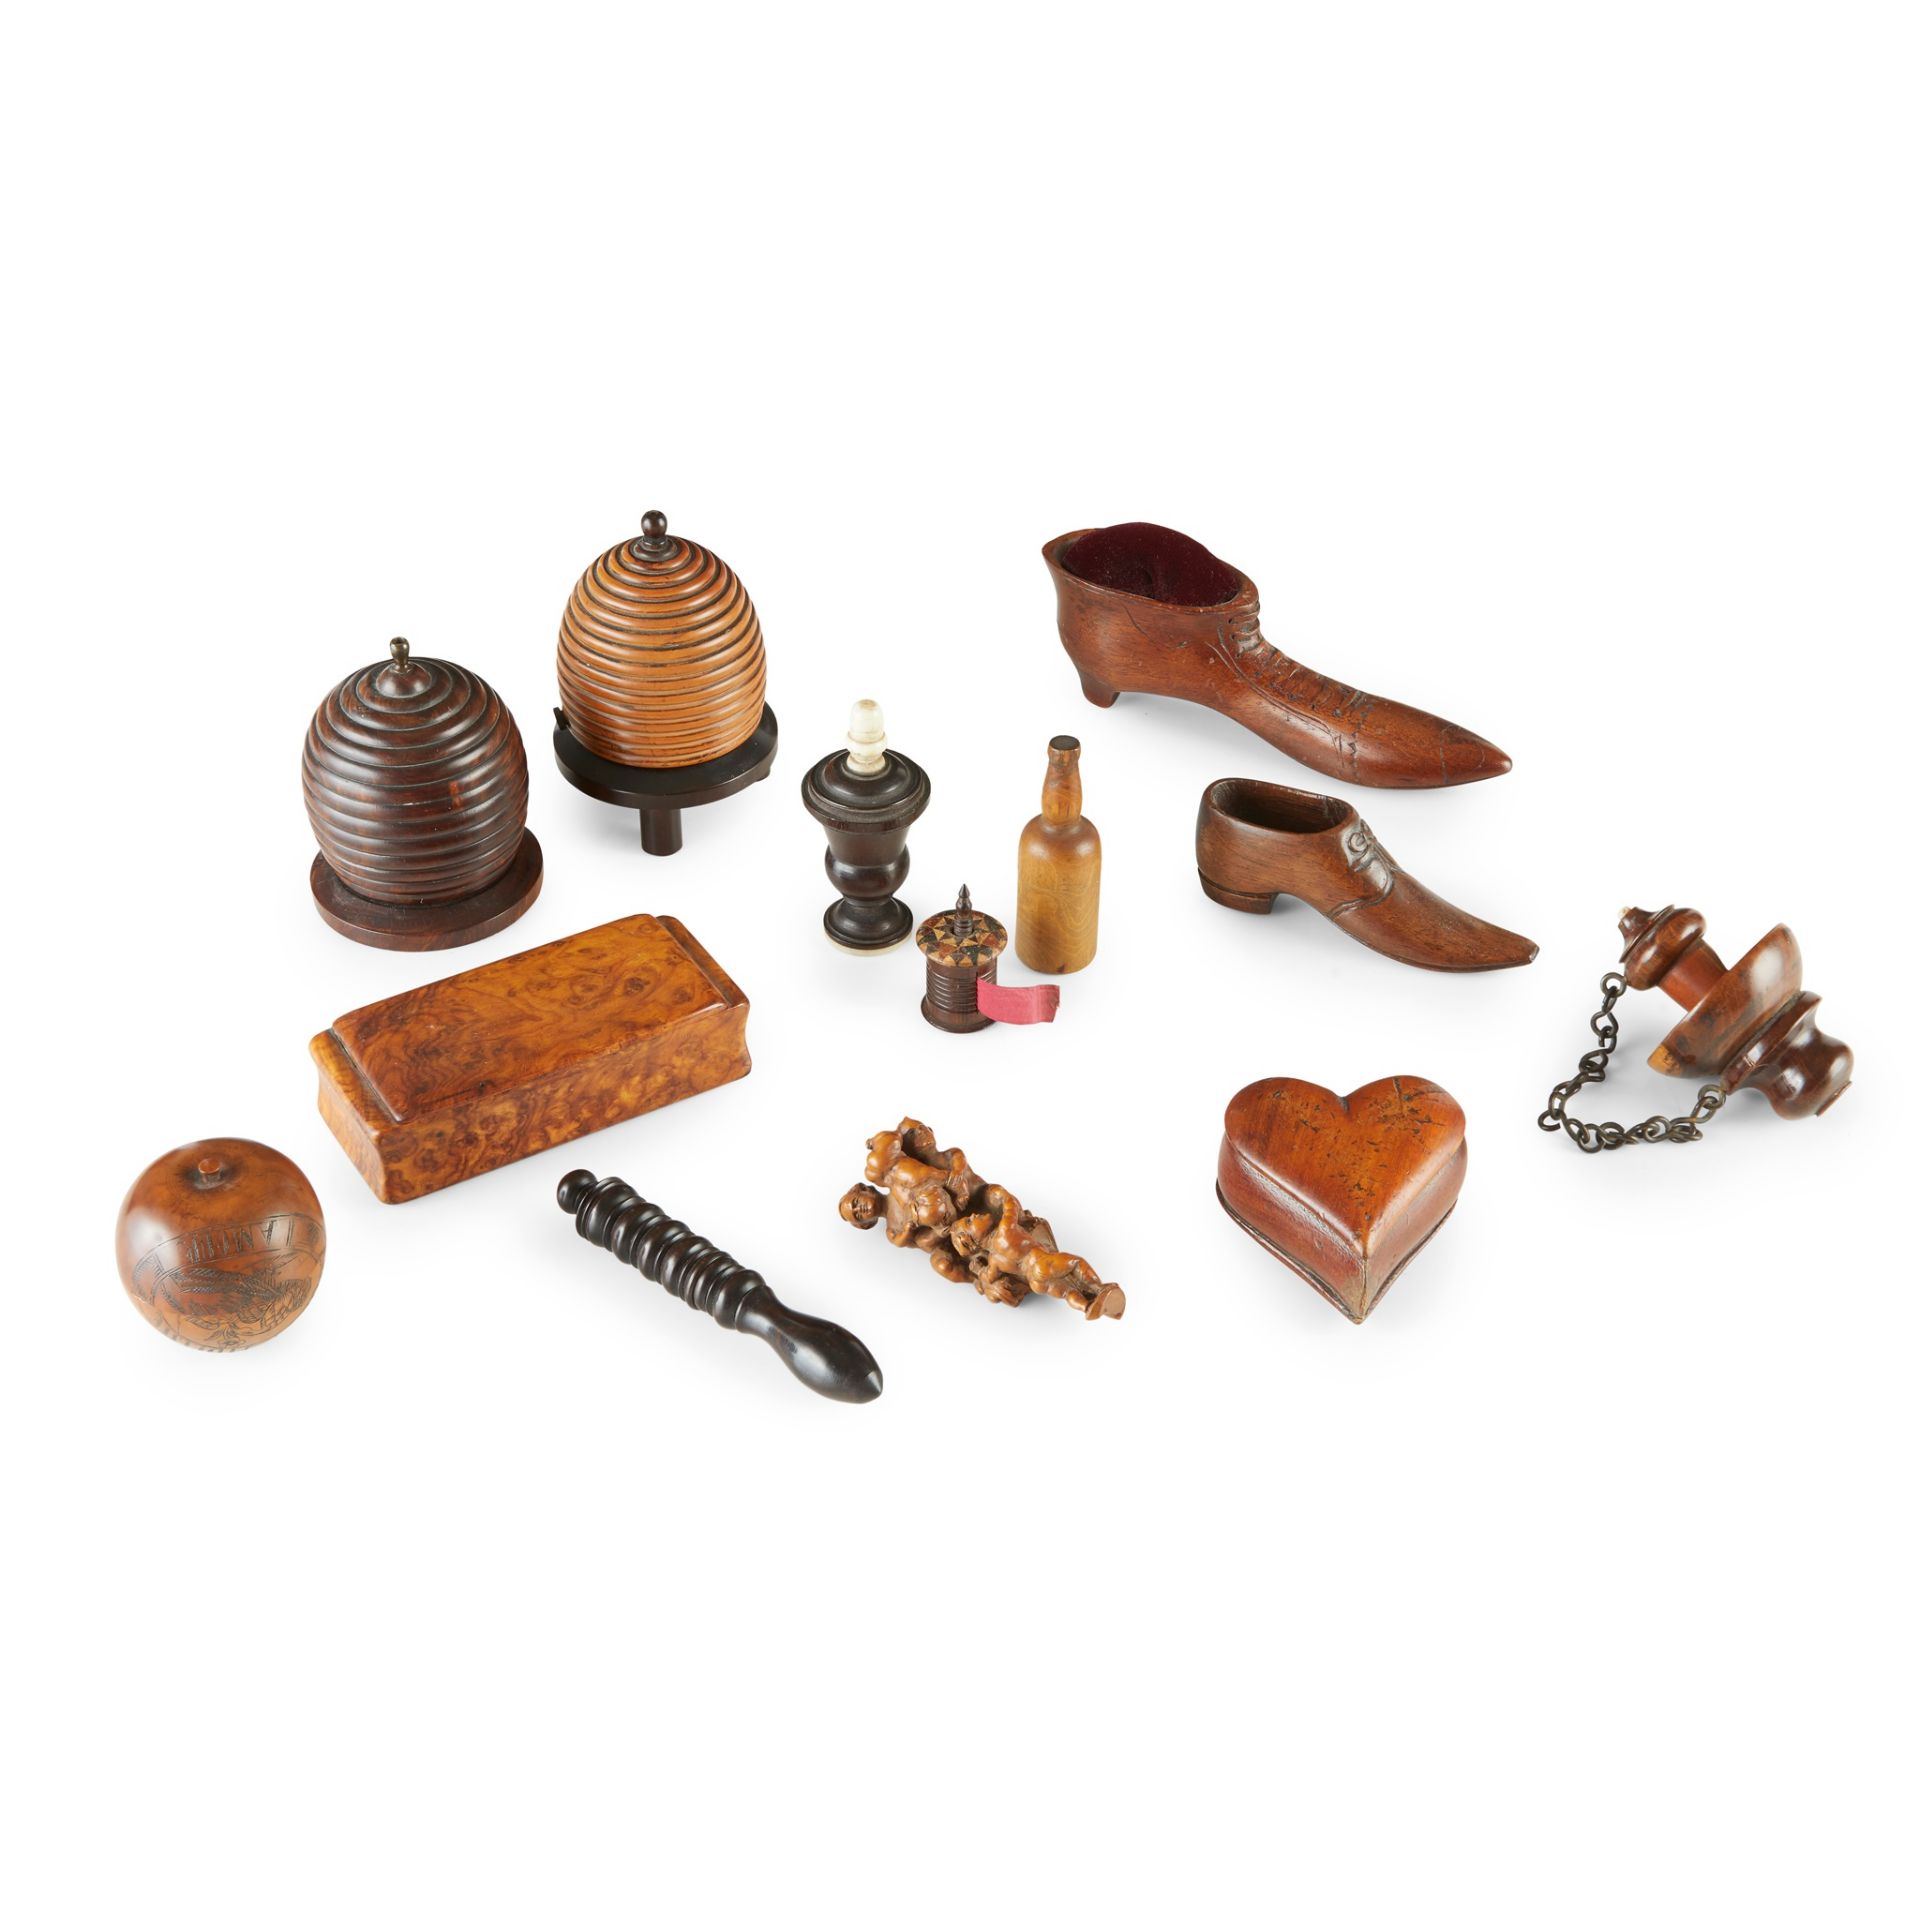 Y GROUP OF SMALL TREEN OBJECTS 19TH CENTURY